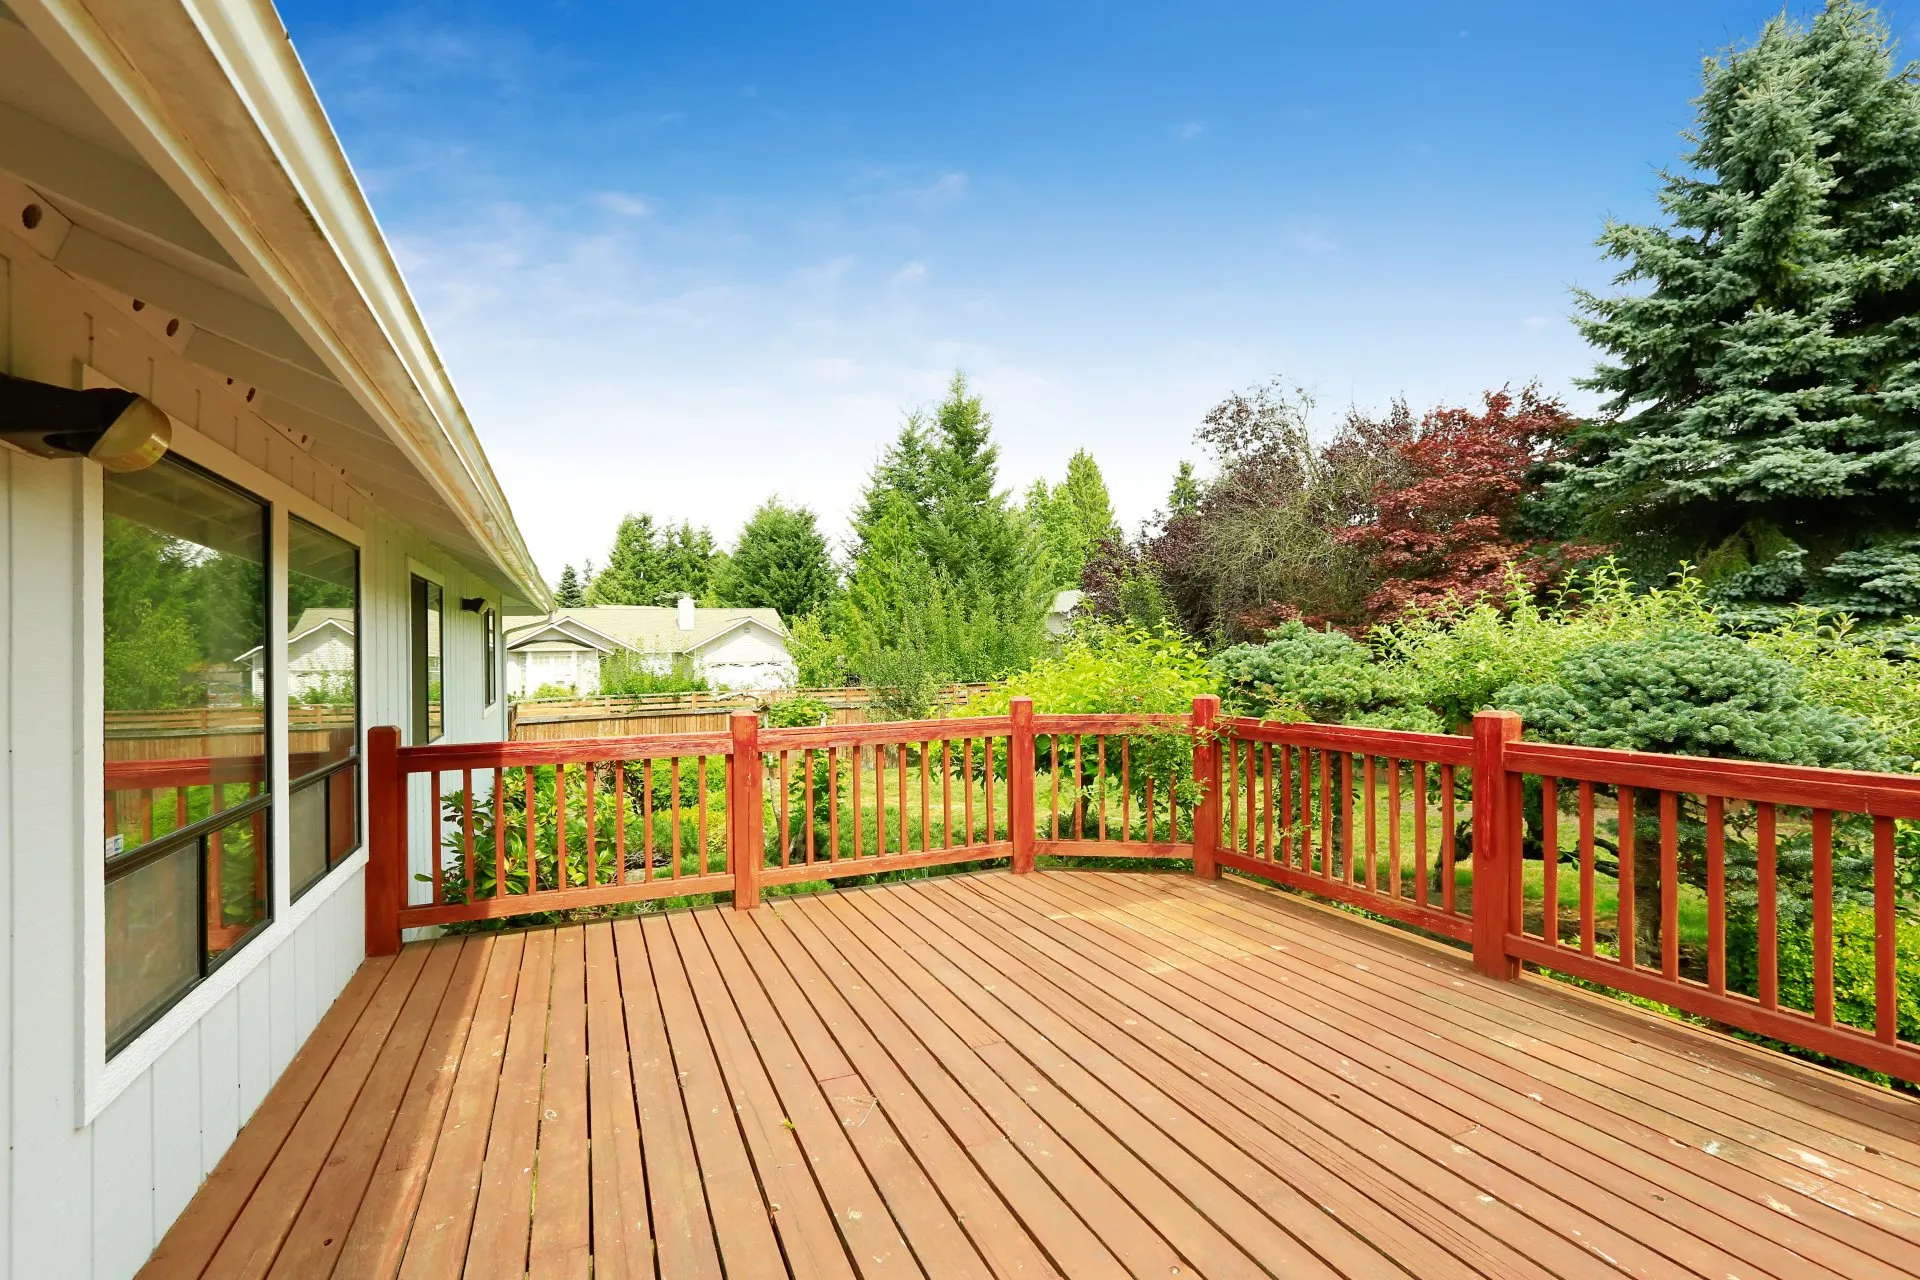 How Much Does It Cost to Build a Deck - Bridgewater MA Deck Builder